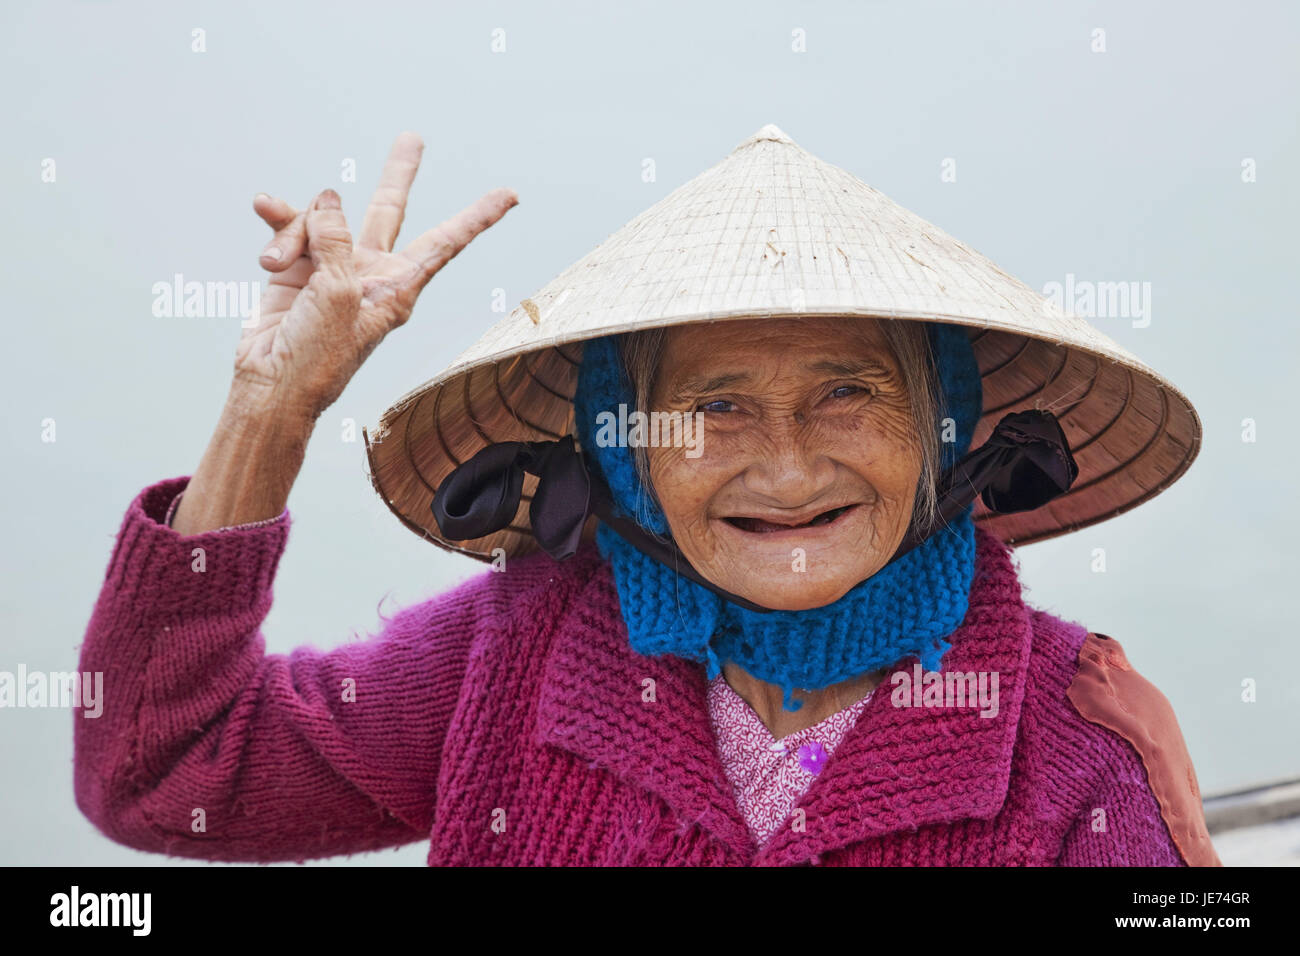 Vietnam, Hoi In, old woman with typical hat, gesture, Victory character, smile, portrait, Stock Photo